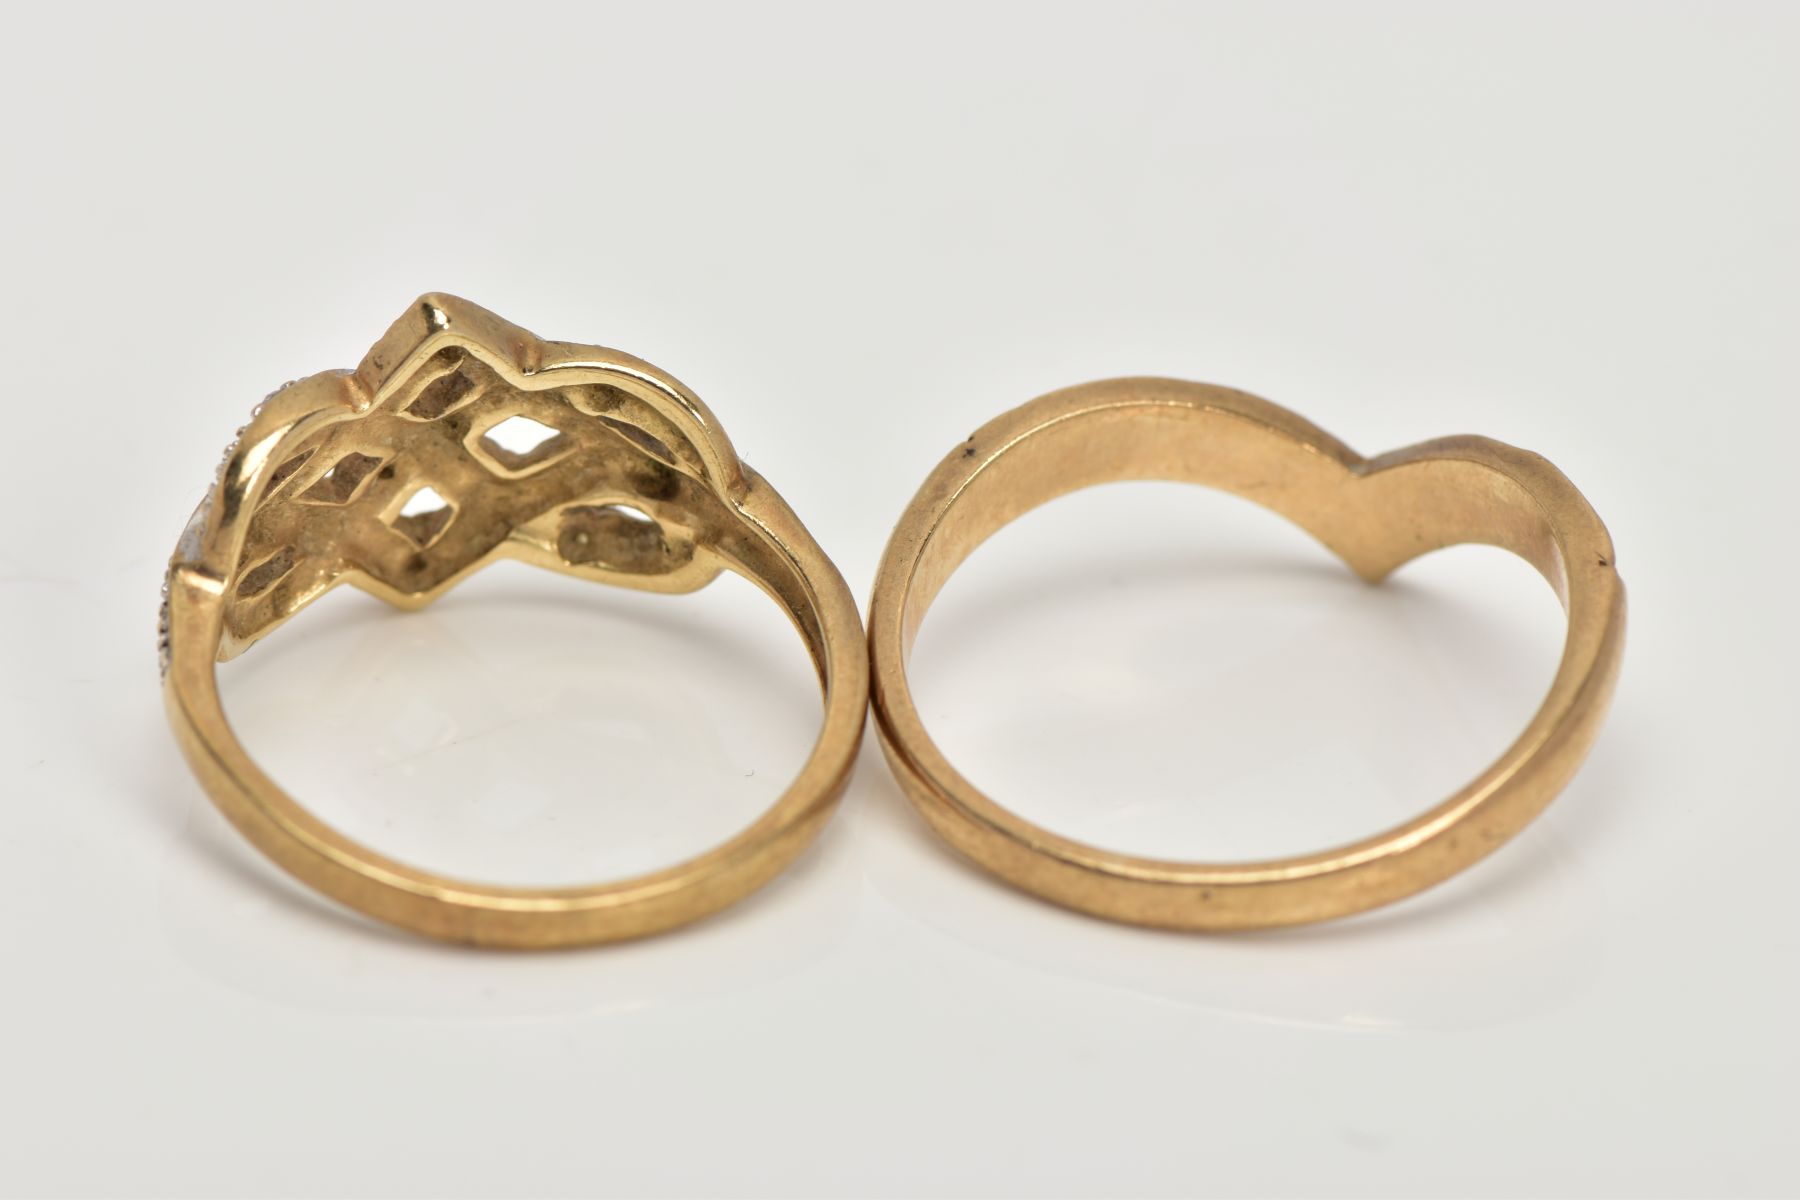 A 9CT GOLD DIAMOND RING AND A WISHBONE RING, the openwork ring set with single cut diamond detail, - Image 3 of 3